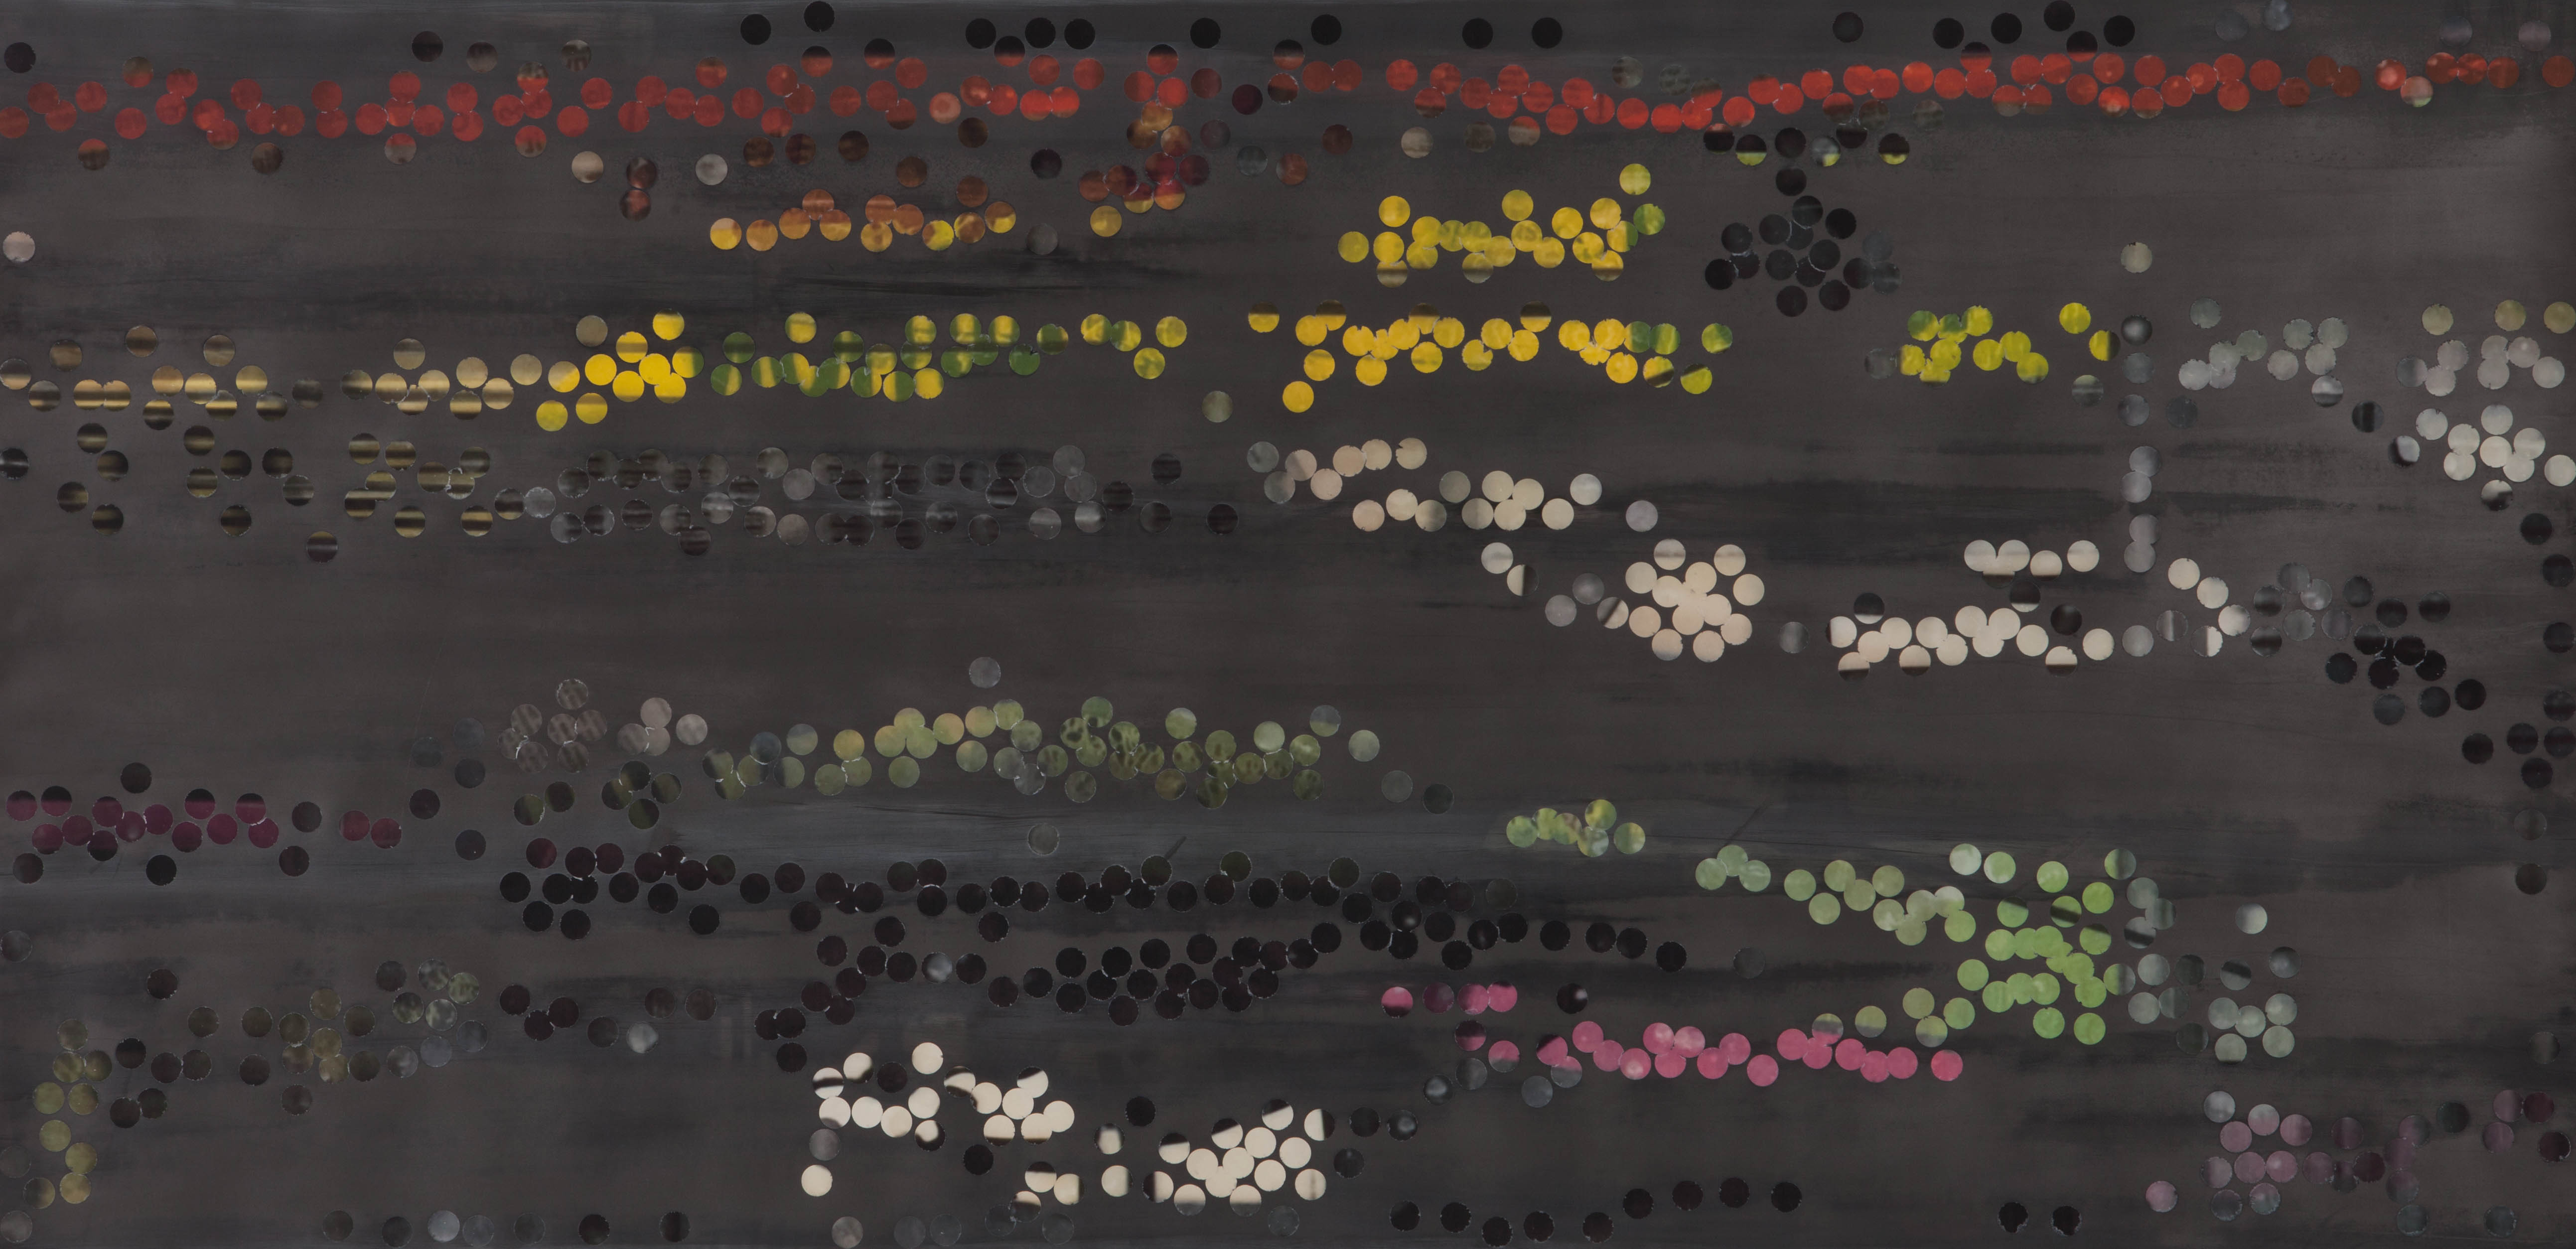 TRIBE 180 - 2013, acrylic, watercolor, graphite on paper, 35.5 x 72 inches (SOLD)